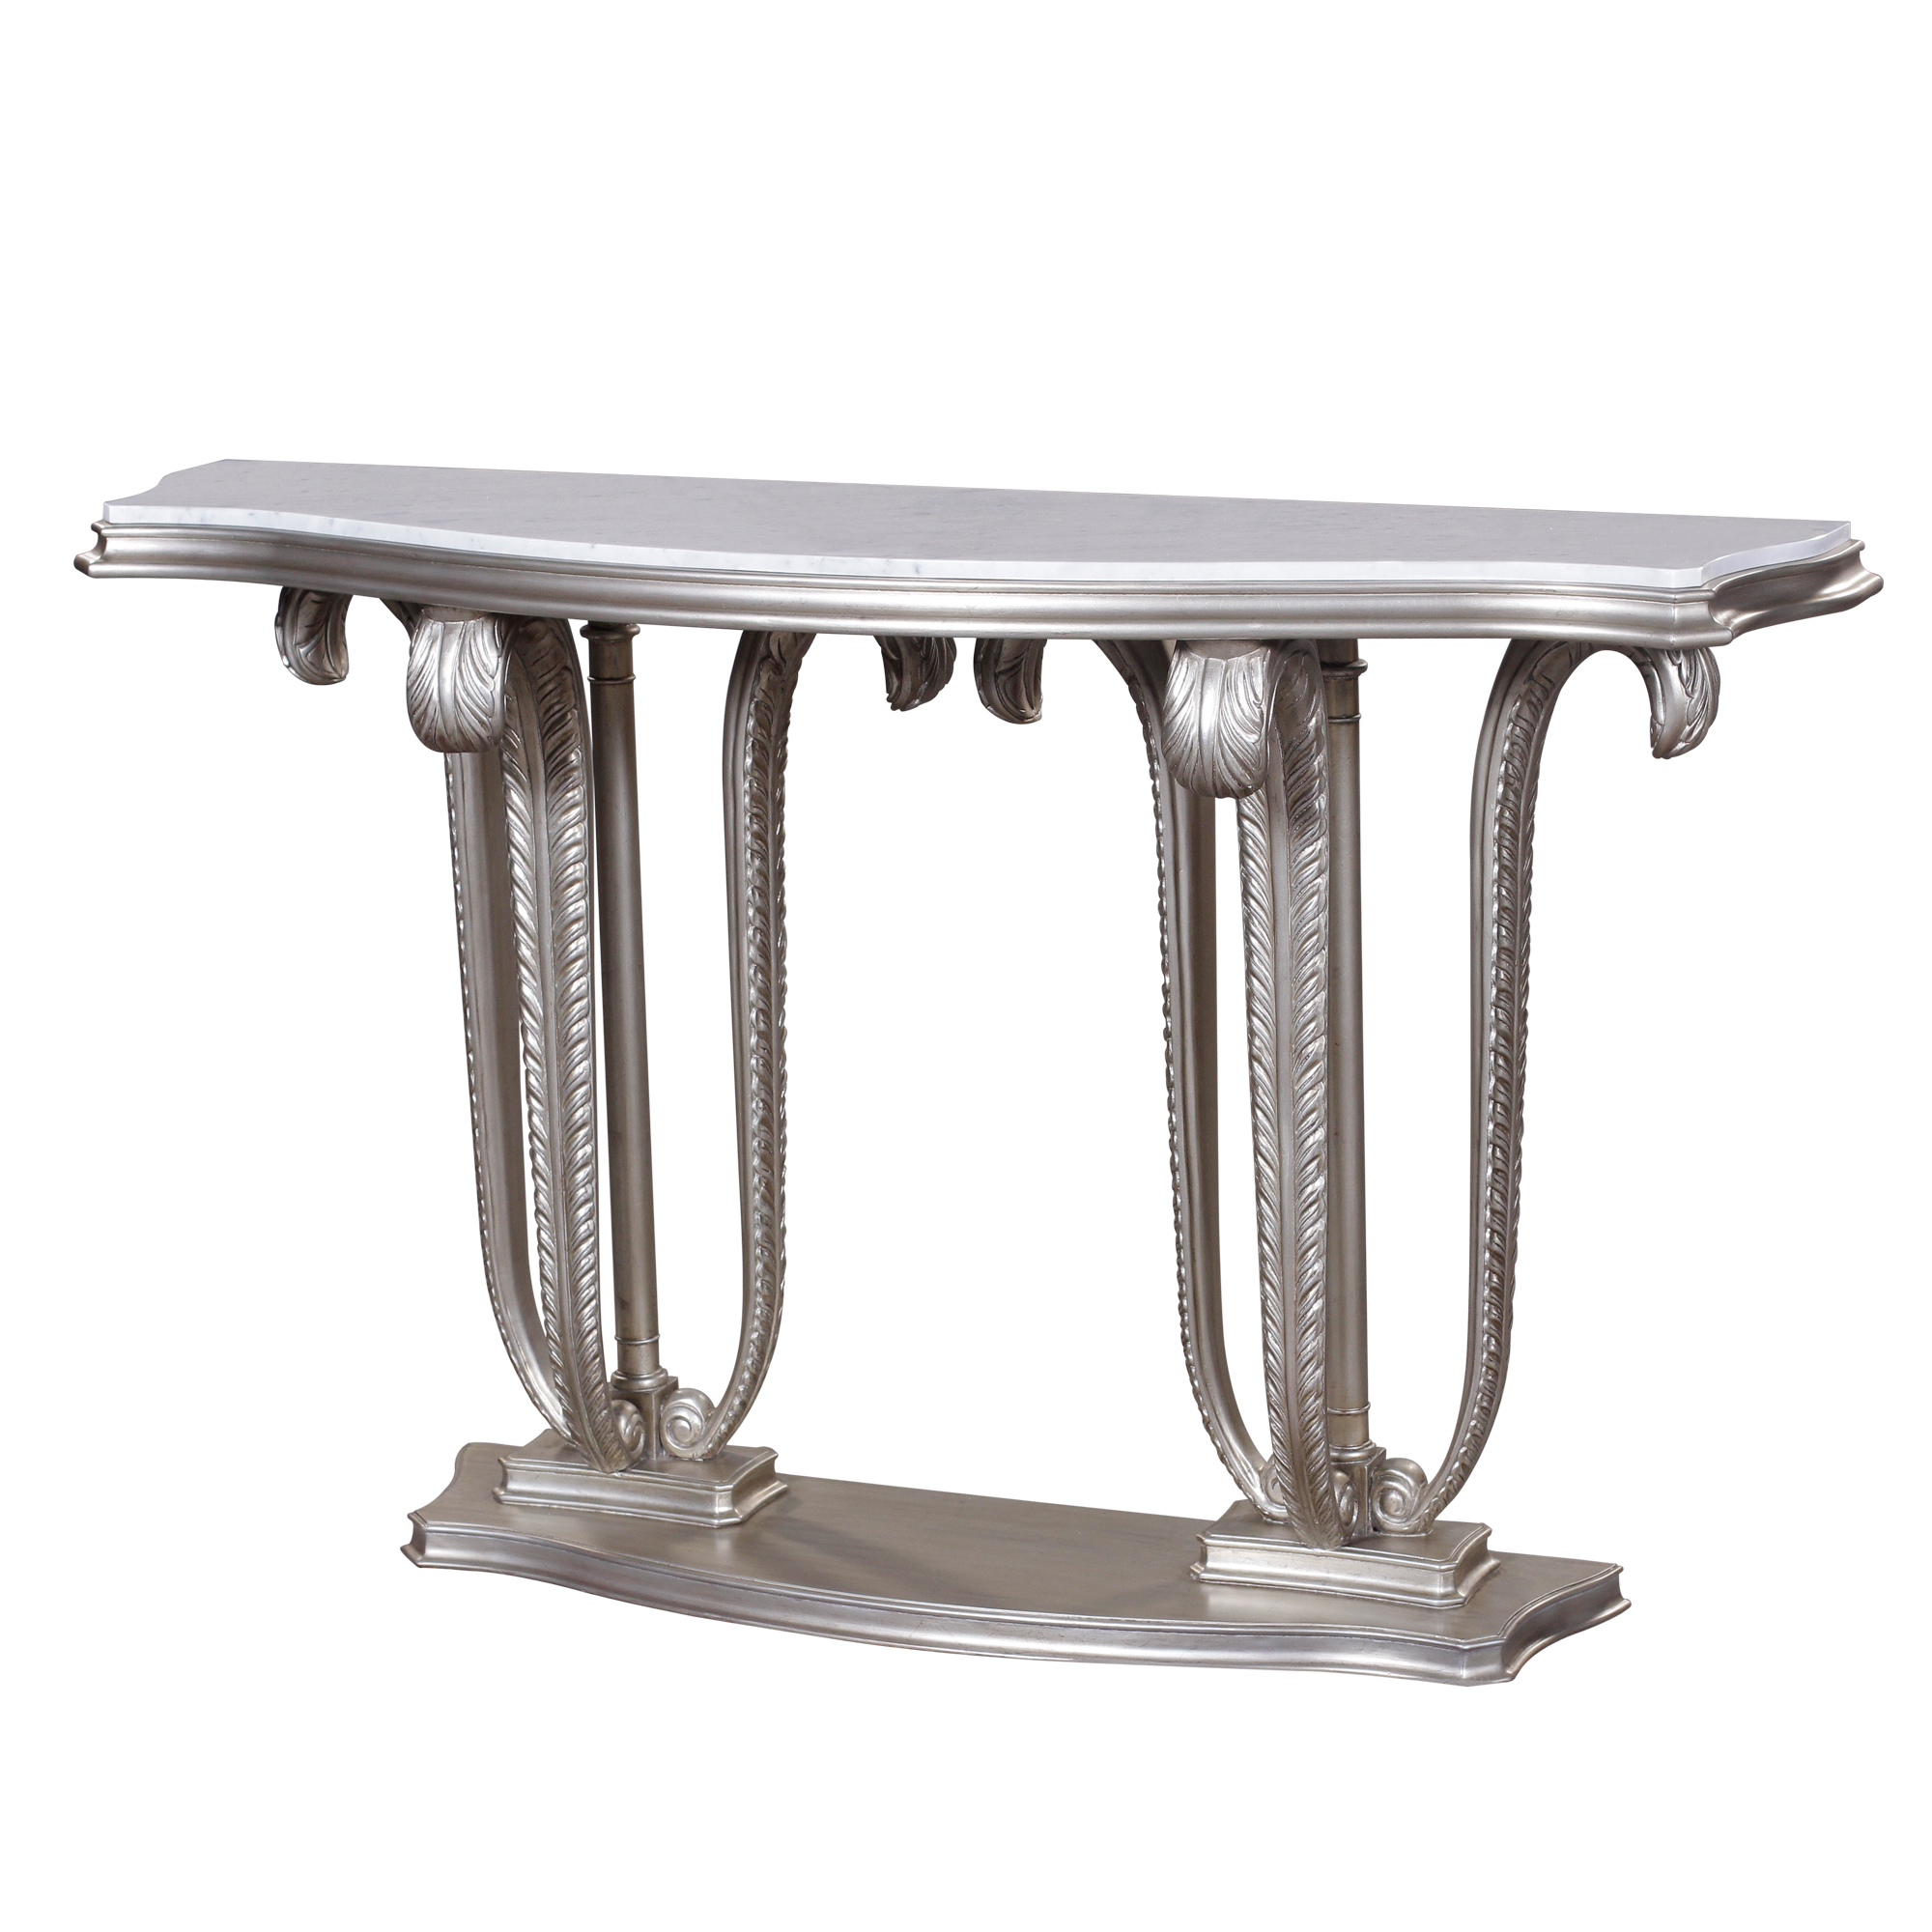 CONSOLE TABLE PLUME WHITE MARBLE Jansen Furniture